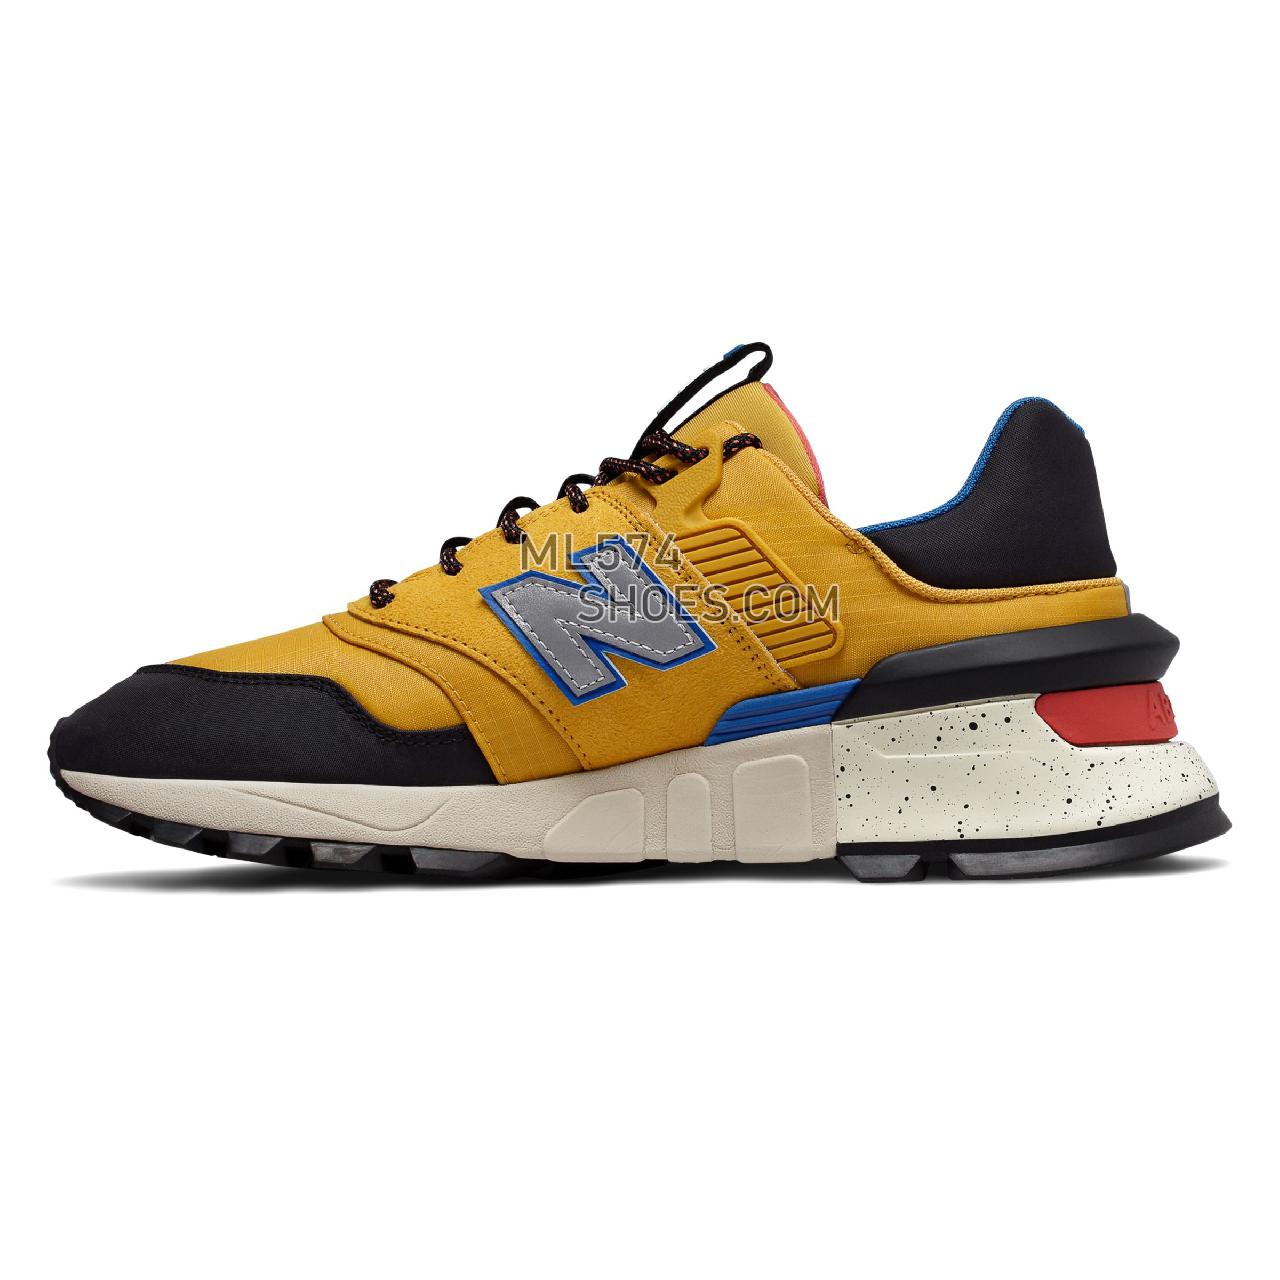 New Balance 997 Sport - Men's Sport Style Sneakers - Varsity Gold with Black and Neo Classic Blue - MS997SKB